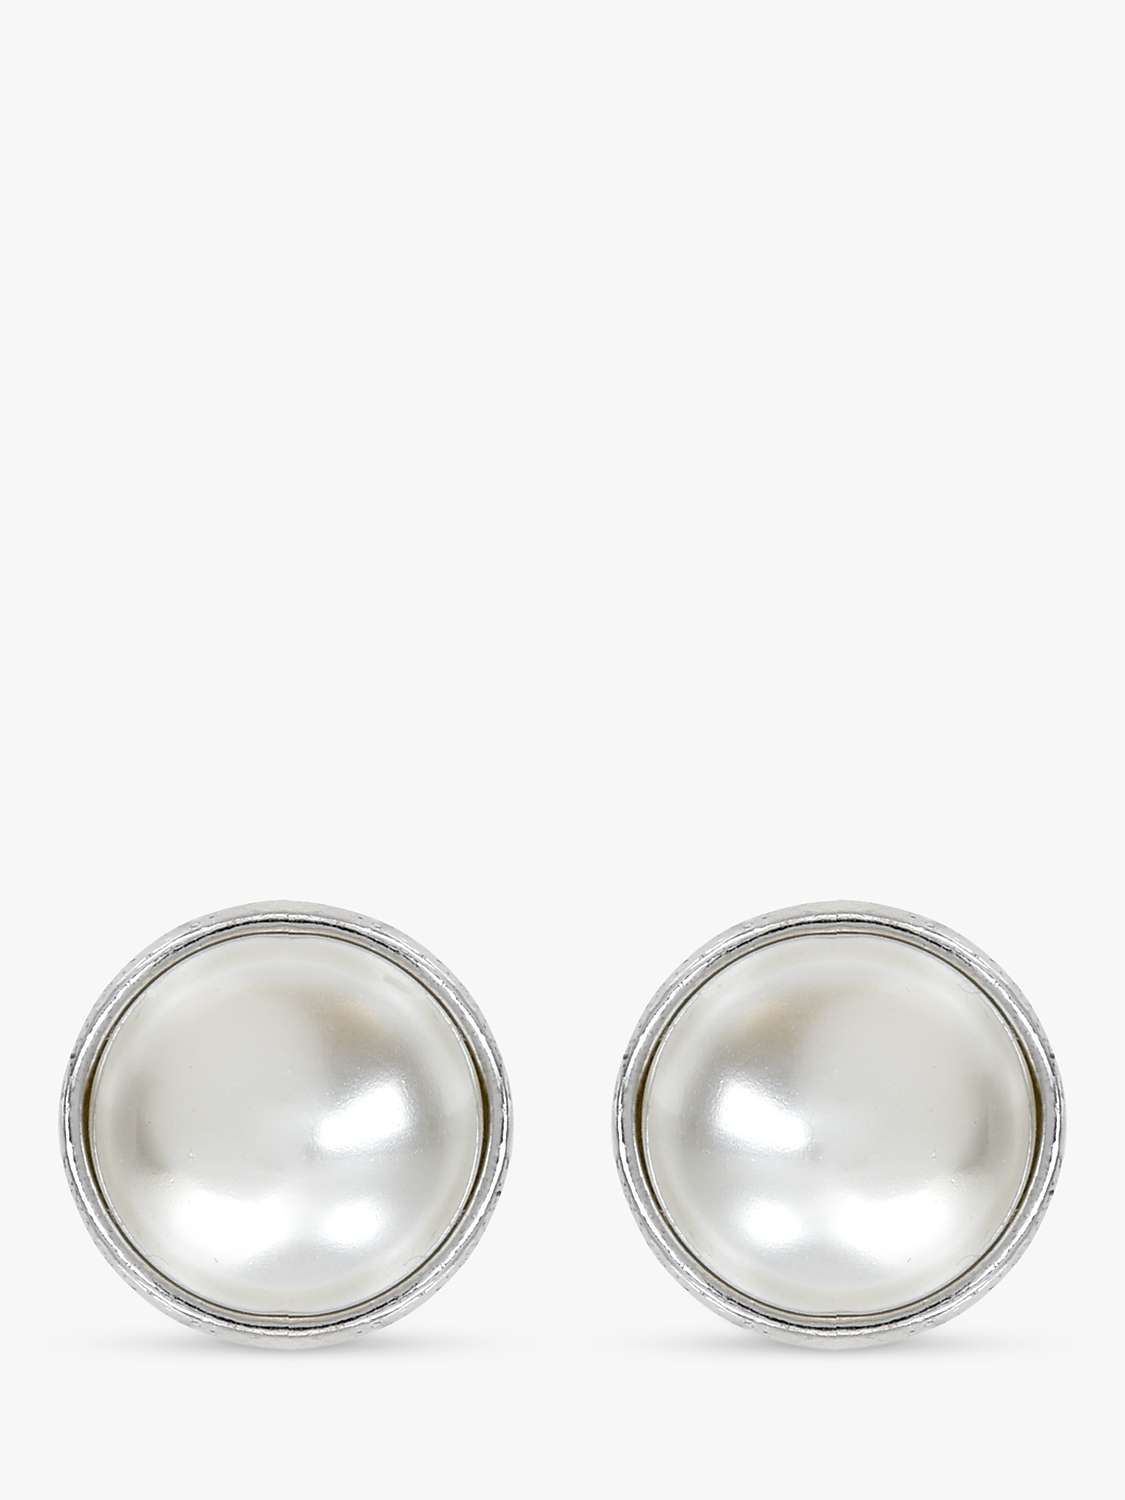 Buy Eclectica Vintage Cabouchon Faux Pearl Clip-On Earrings, Silver Online at johnlewis.com